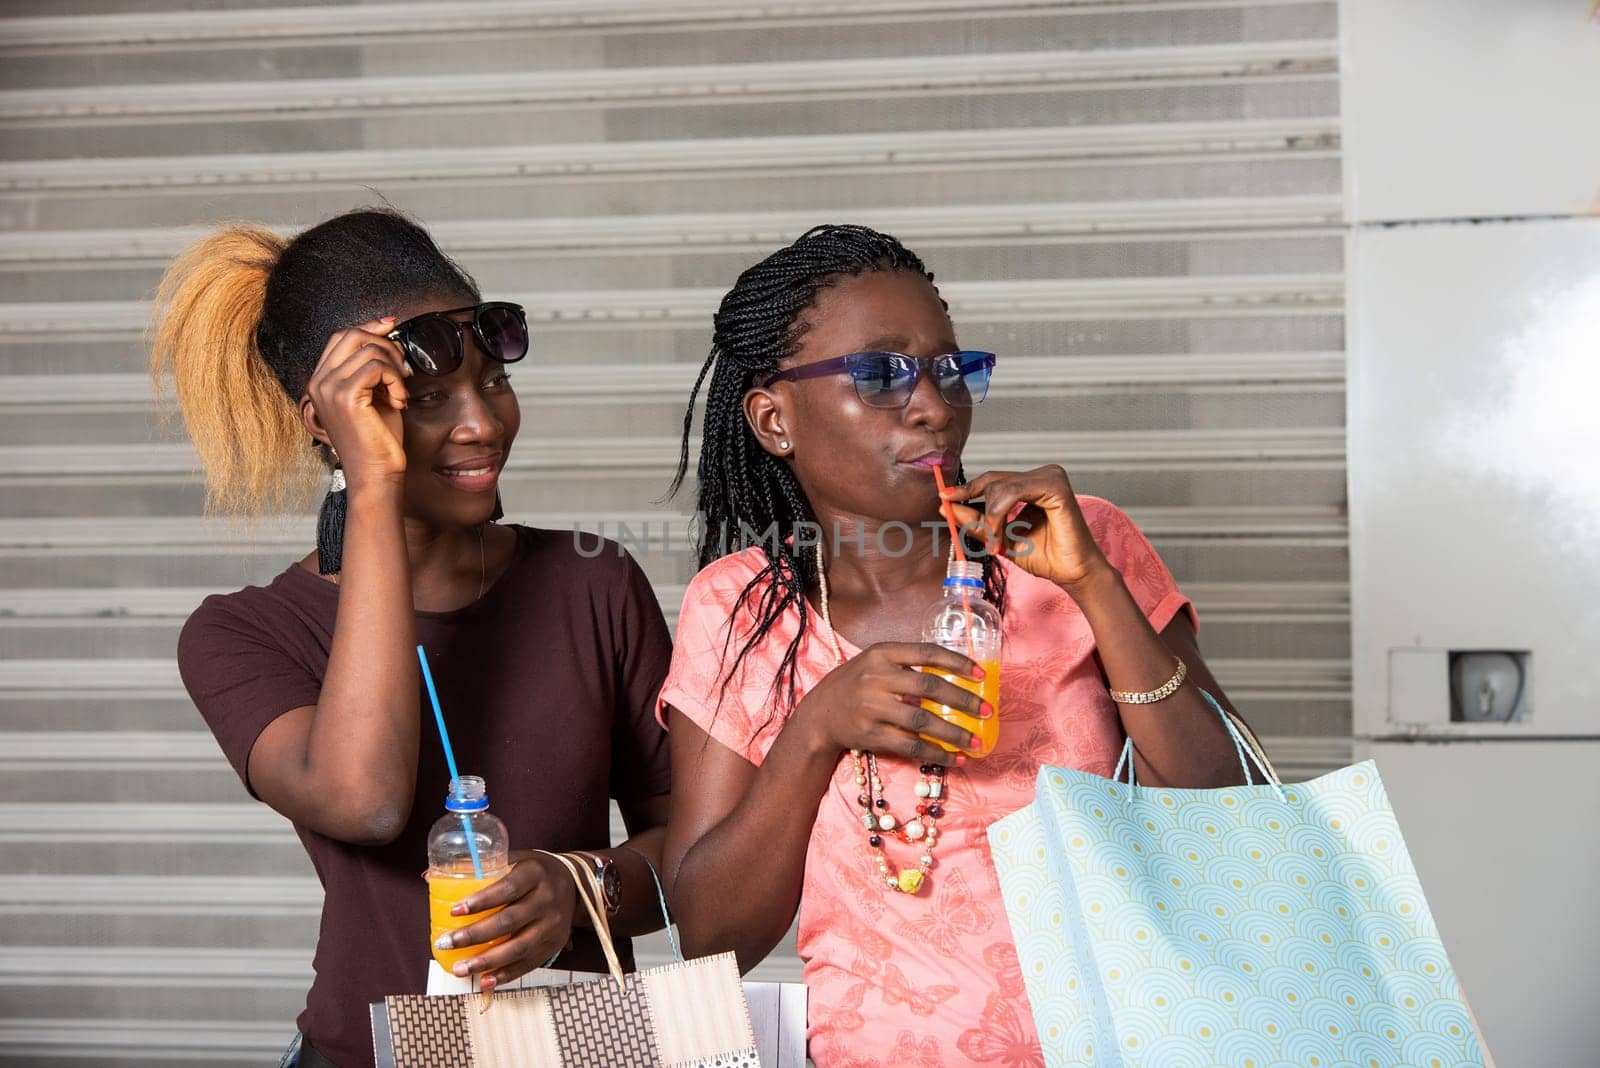 Young girls standing in glasses watching something with bottles of juice in hand after shopping.